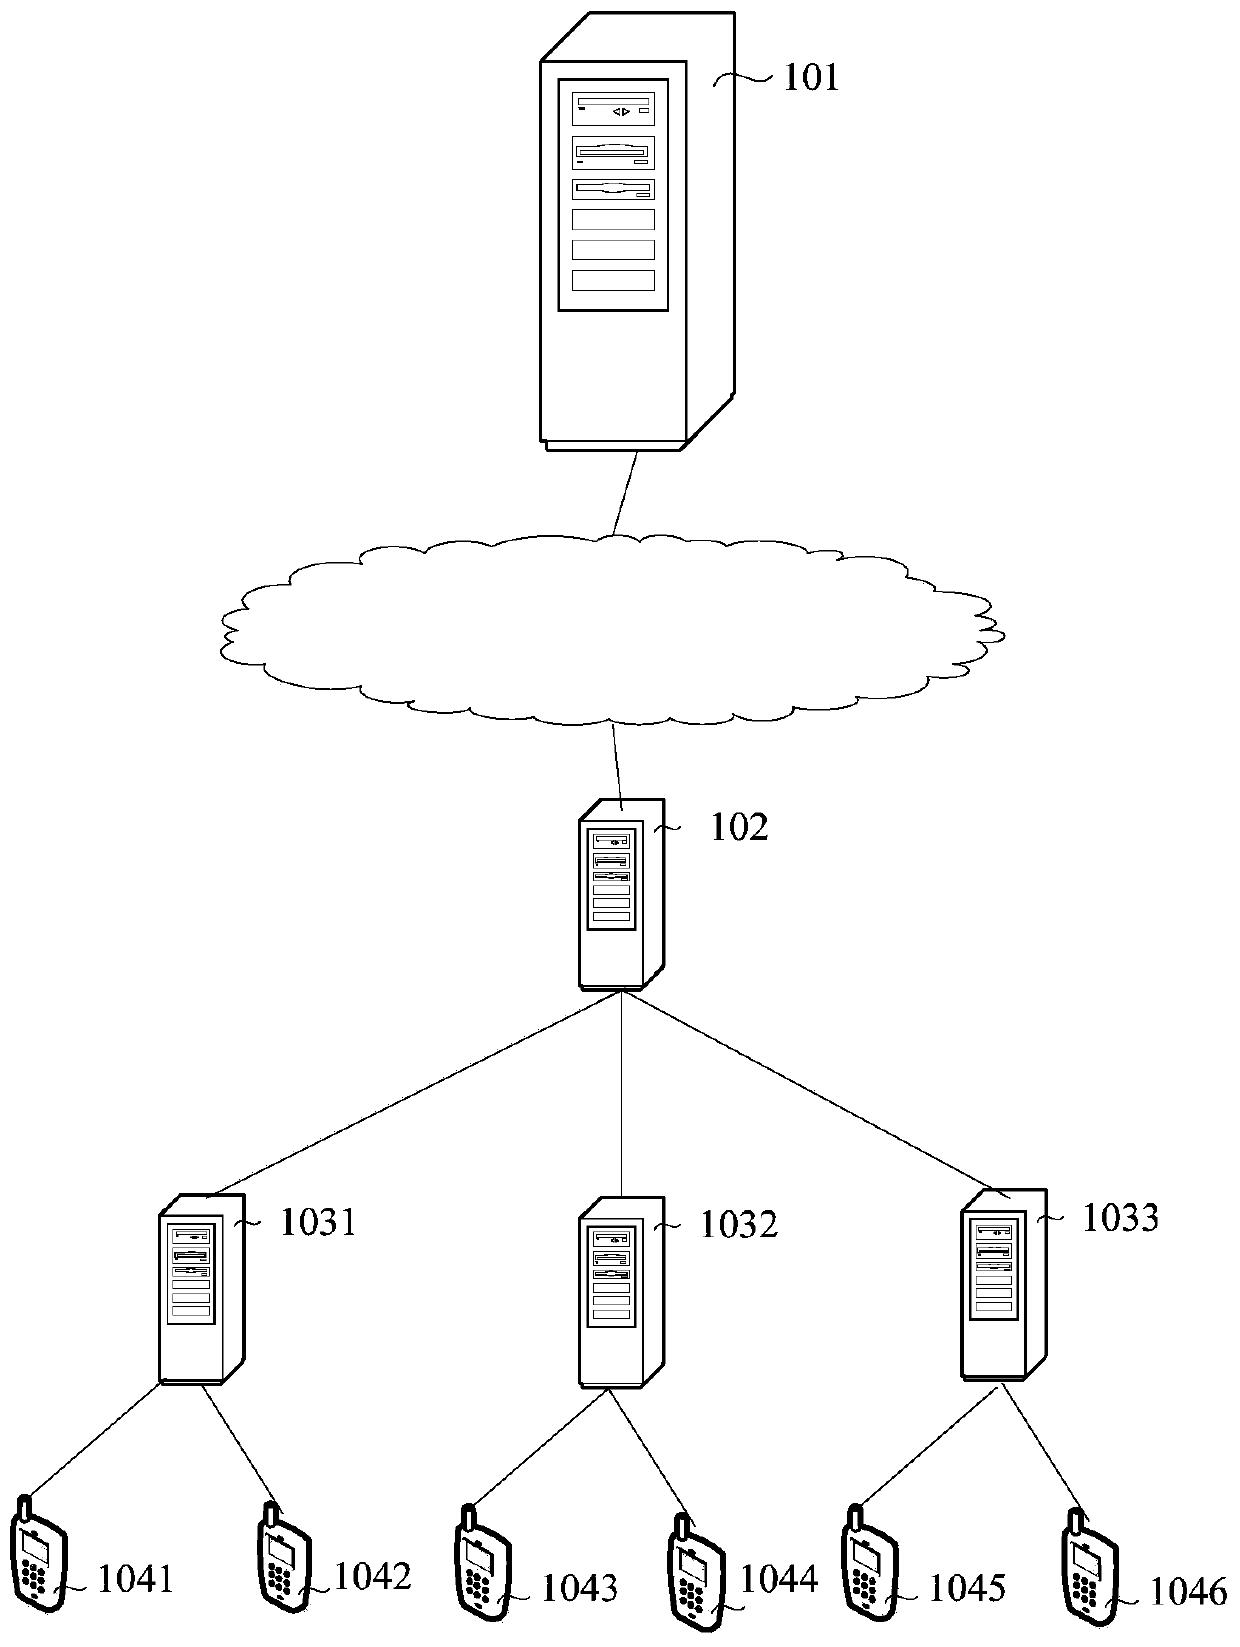 A method and related device for obtaining target files